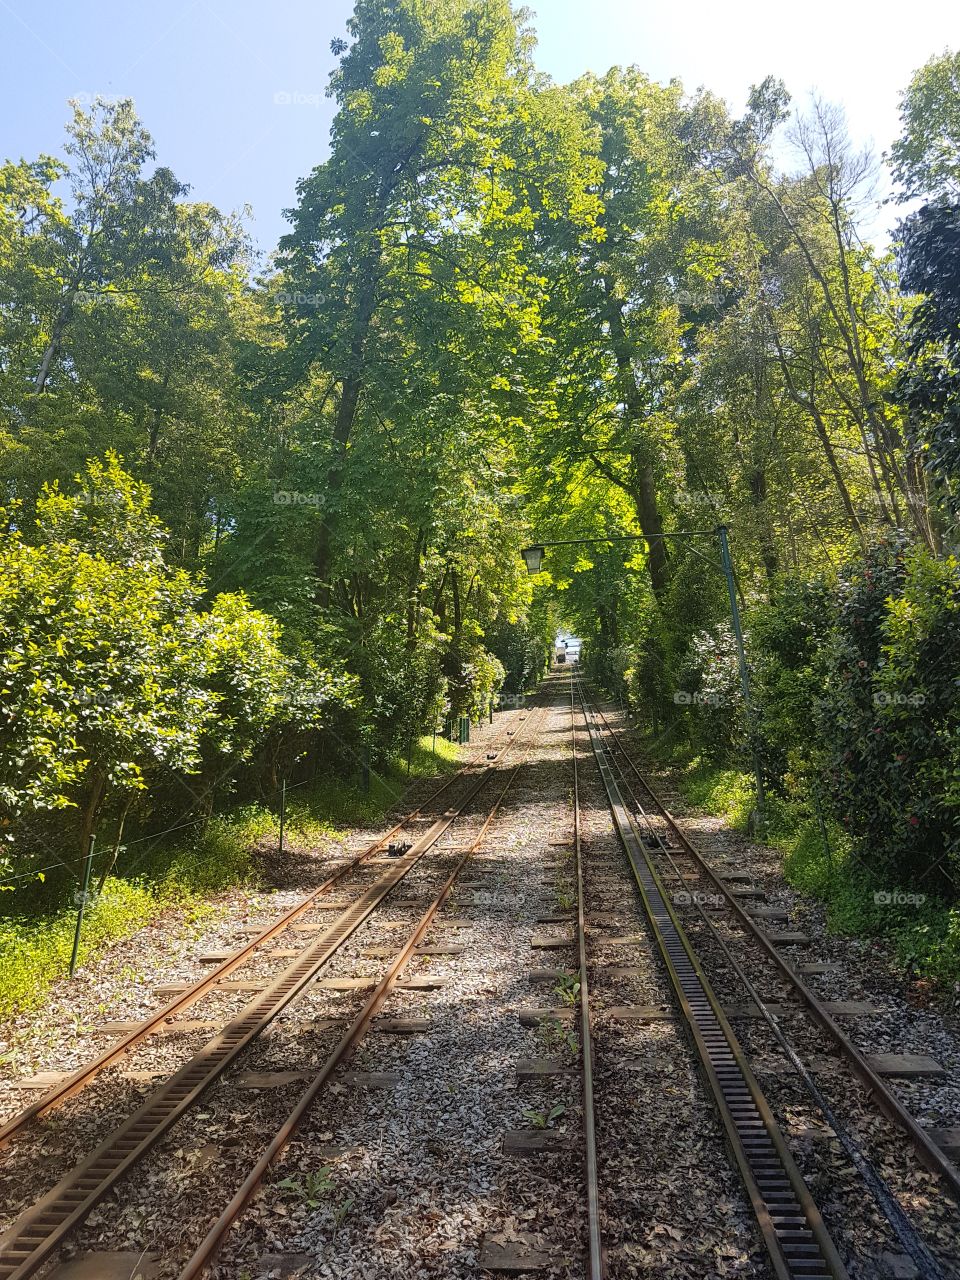 Old railway crossing a green forest in a sunny day